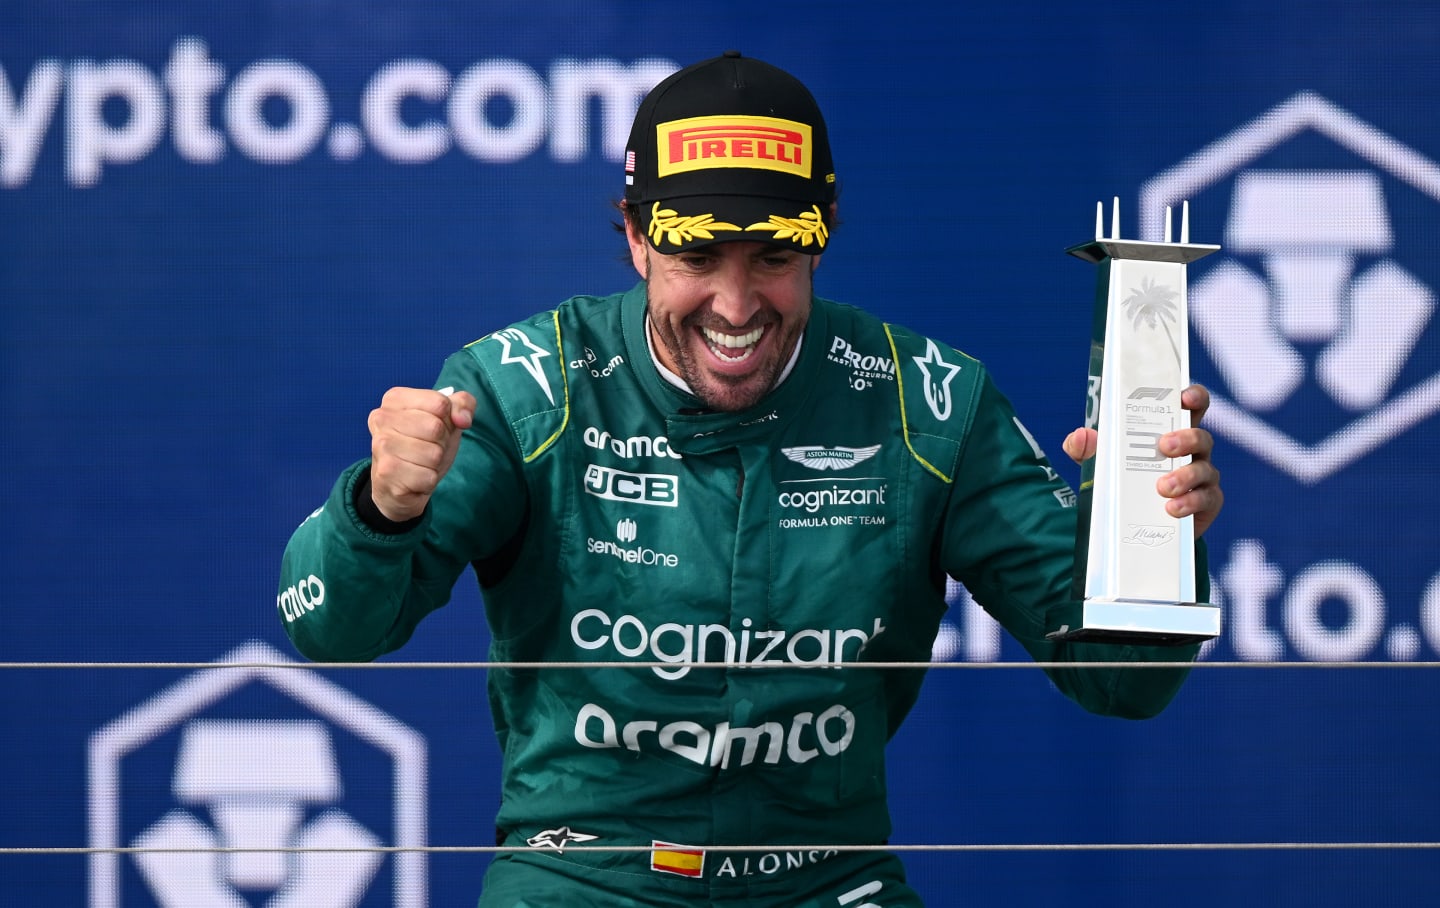 MIAMI, FLORIDA - MAY 07: Third placed Fernando Alonso of Spain and Aston Martin F1 Team celebrates on the podium during the F1 Grand Prix of Miami at Miami International Autodrome on May 07, 2023 in Miami, Florida. (Photo by Clive Mason - Formula 1/Formula 1 via Getty Images)